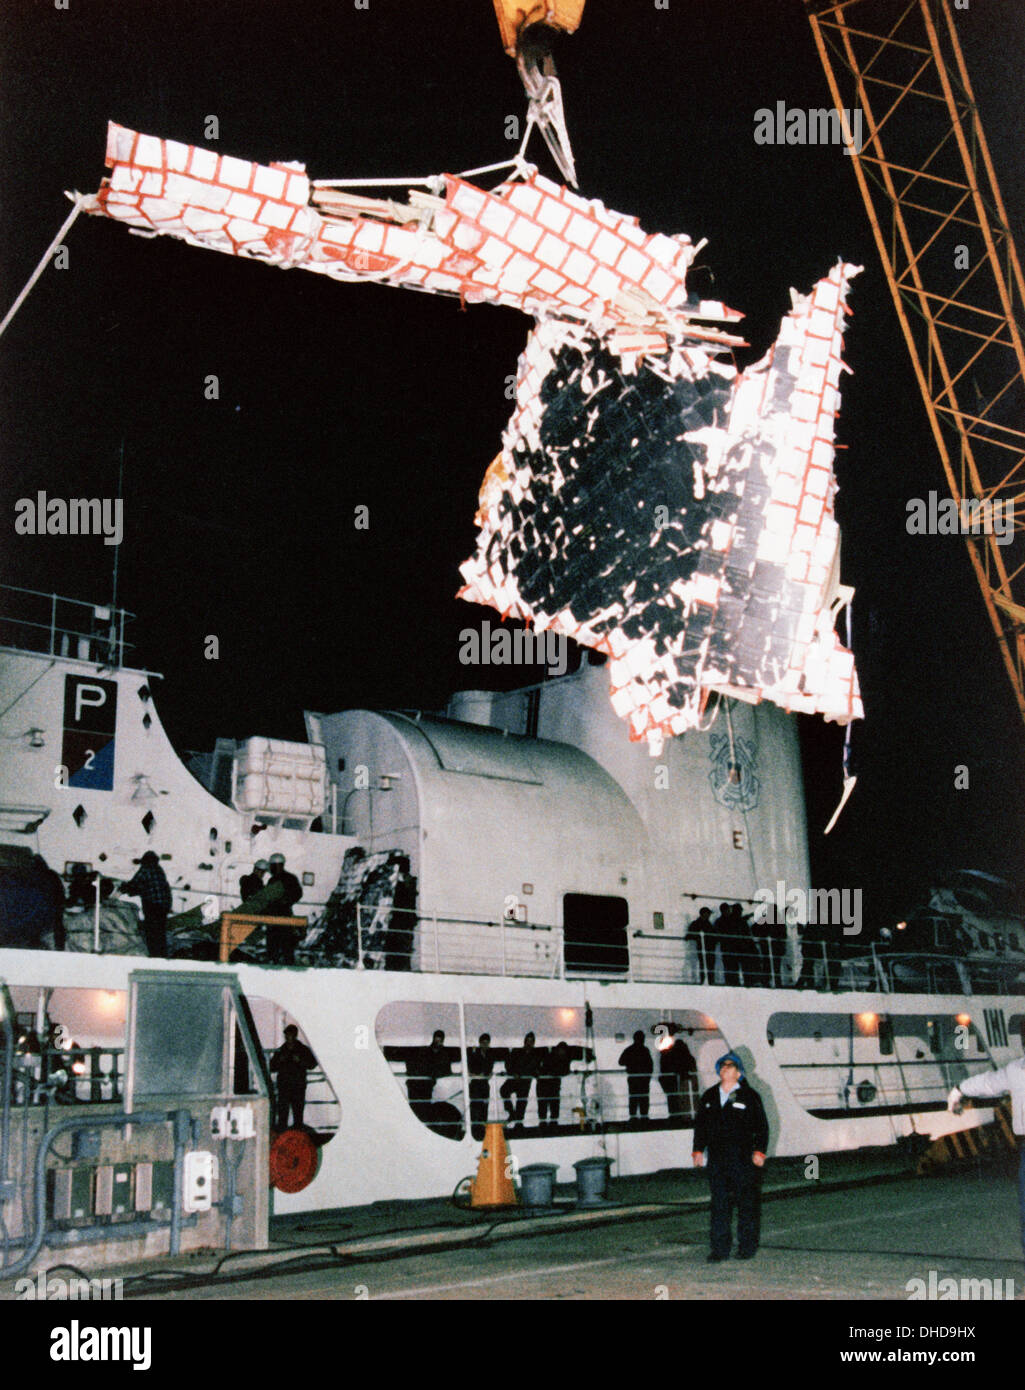 Wreckage from the space shuttle Challenger, STS-51L mission Stock Photo: 62373190 - Alamy1025 x 1390